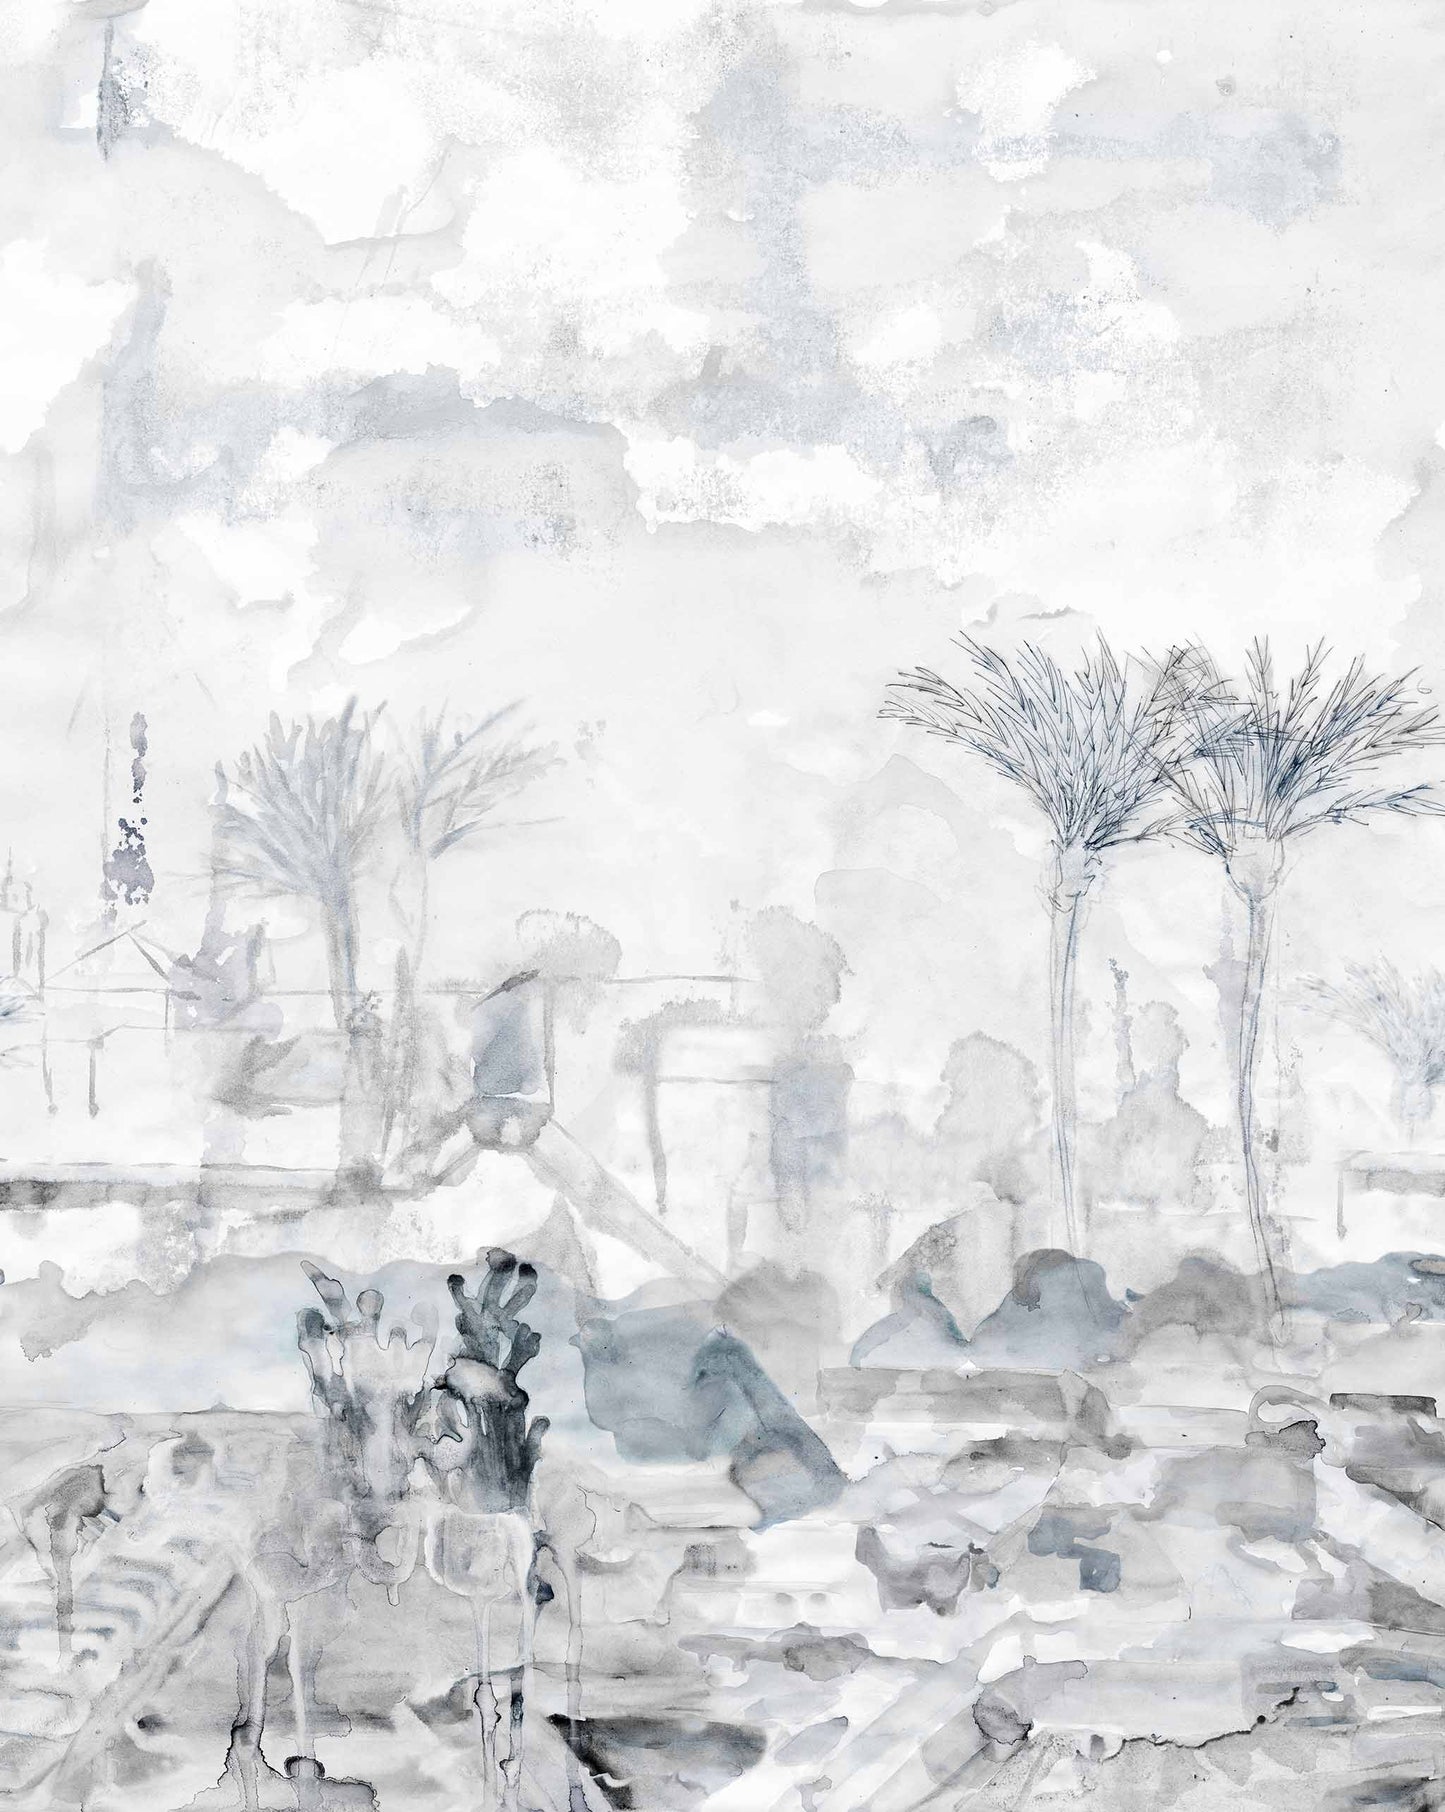 Monochrome abstract Palmeraie Wallpaper Mural depicting a vague, ghostly Marrakech cityscape with indistinct figures and trees.